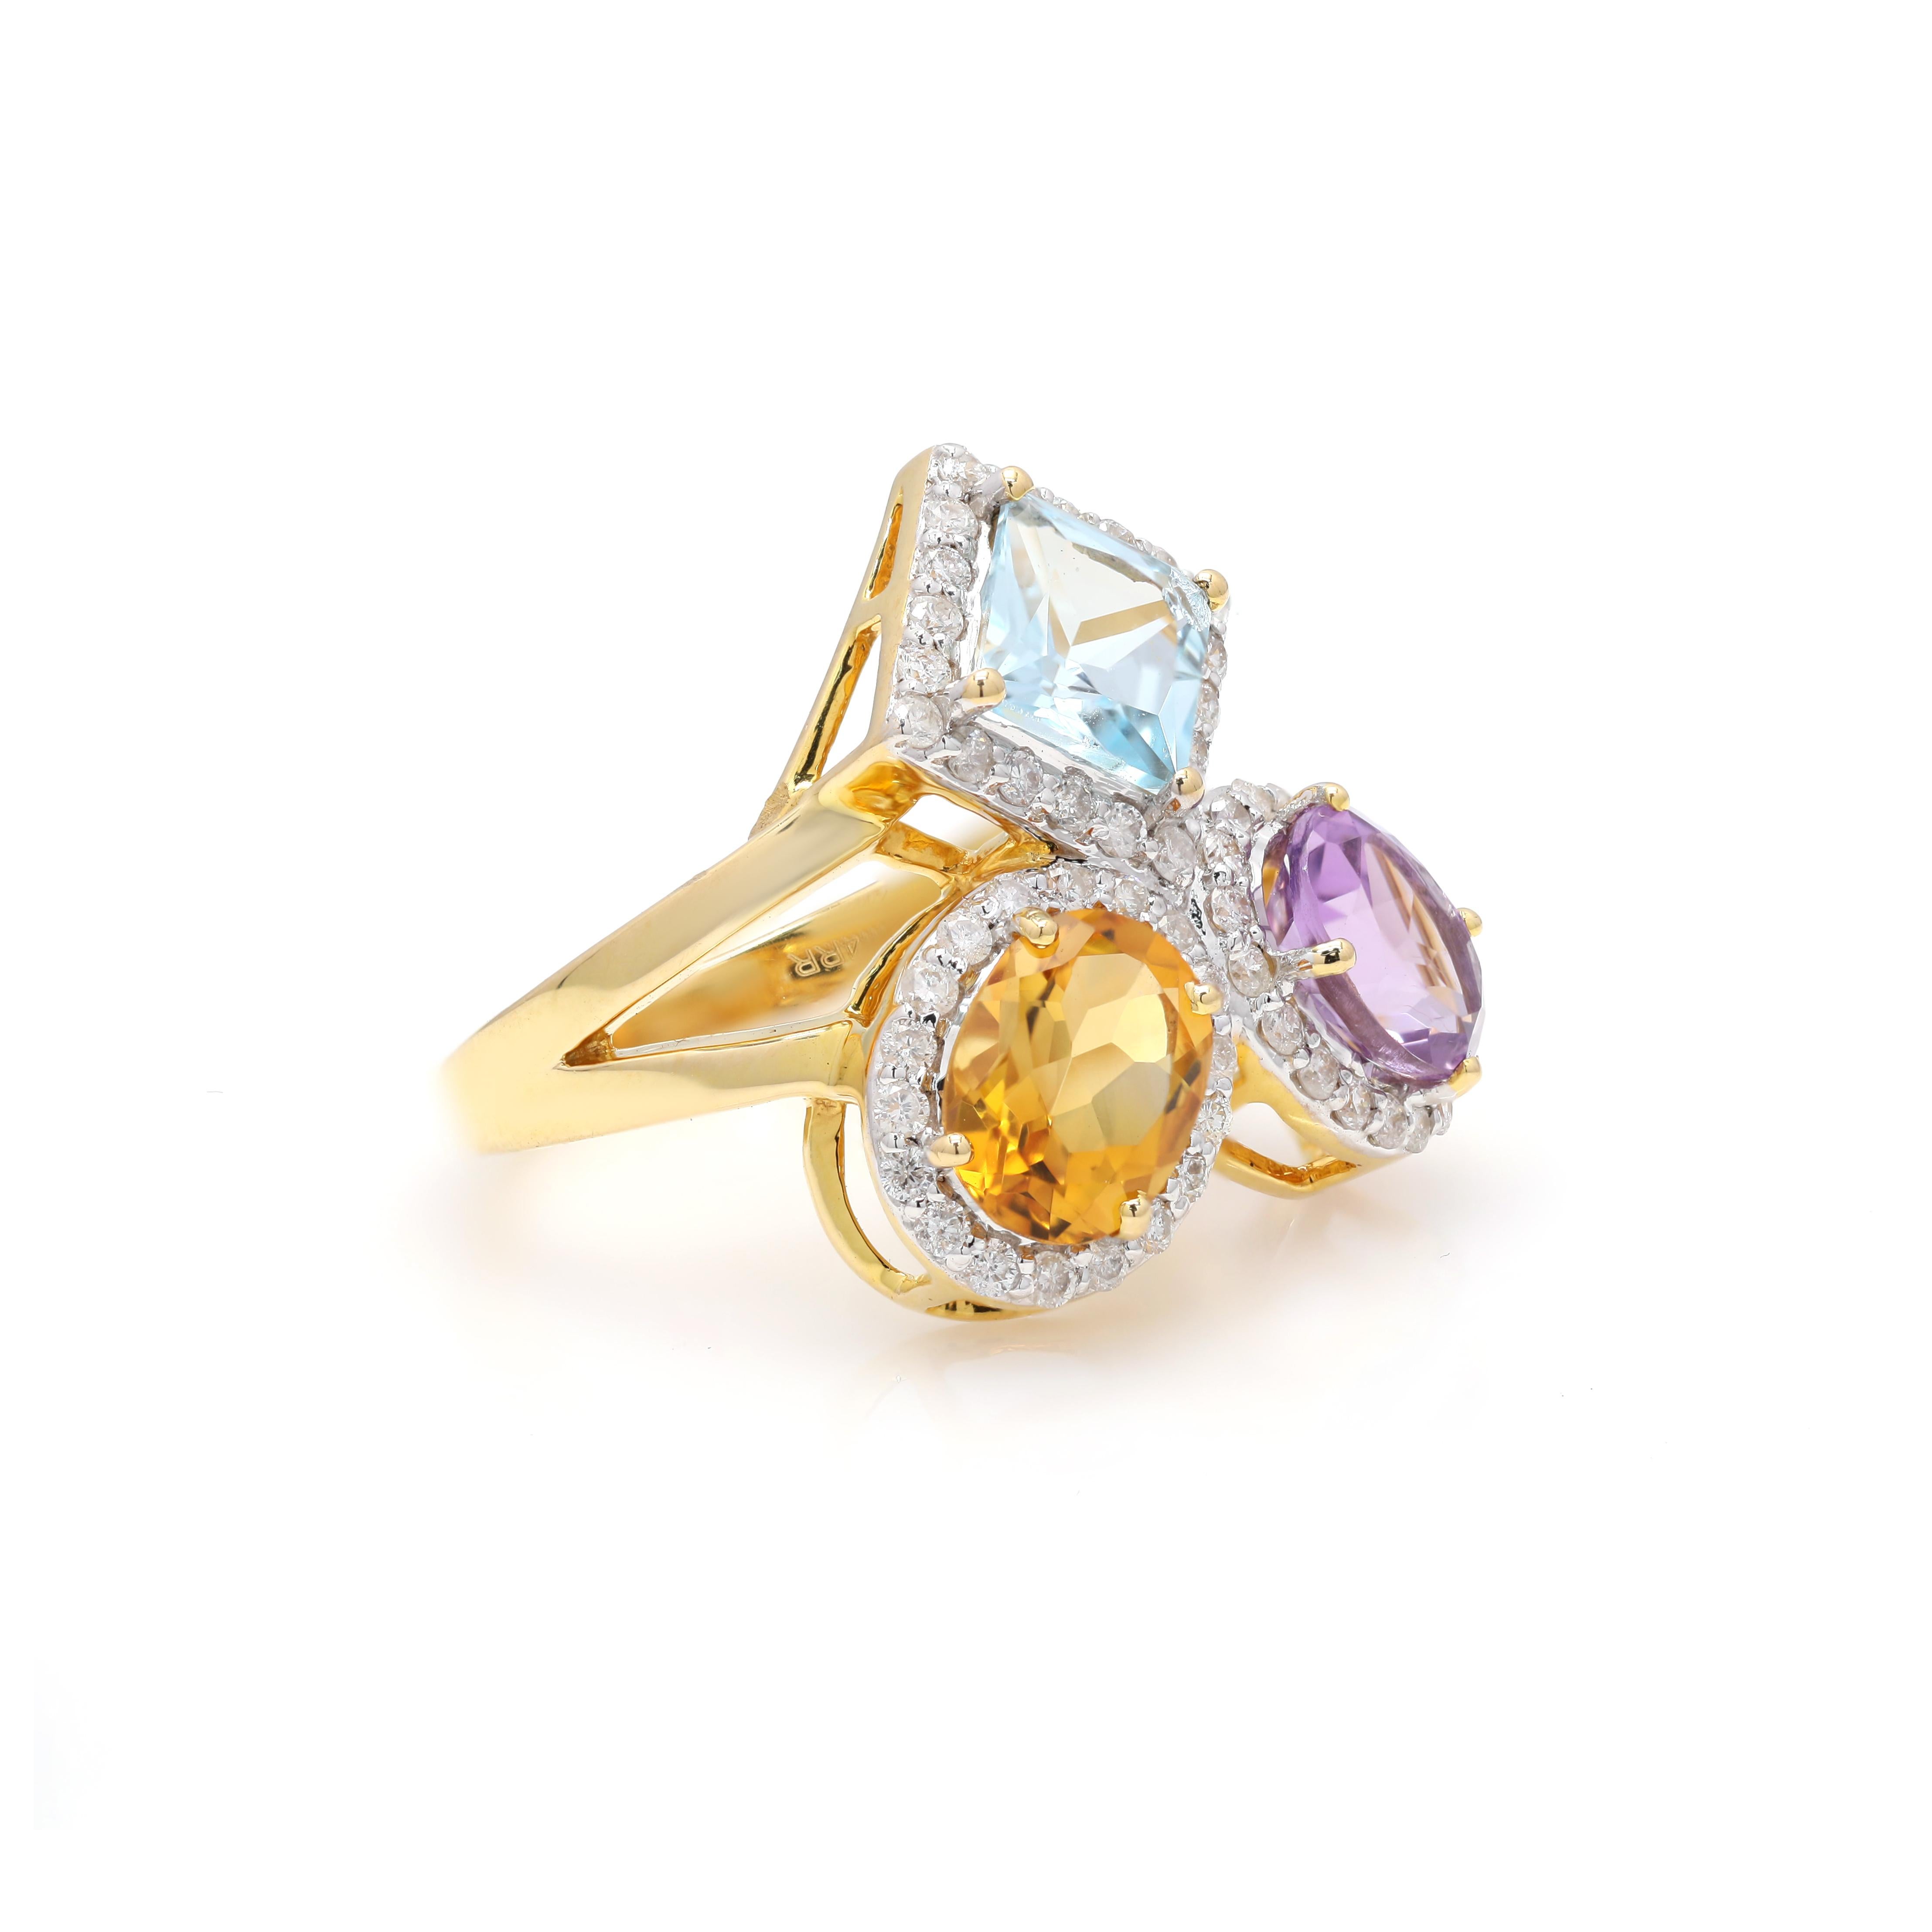 For Sale:  Statement 7.23ct Semi Precious Cocktail Ring in 18k Yellow Gold with Diamonds 2